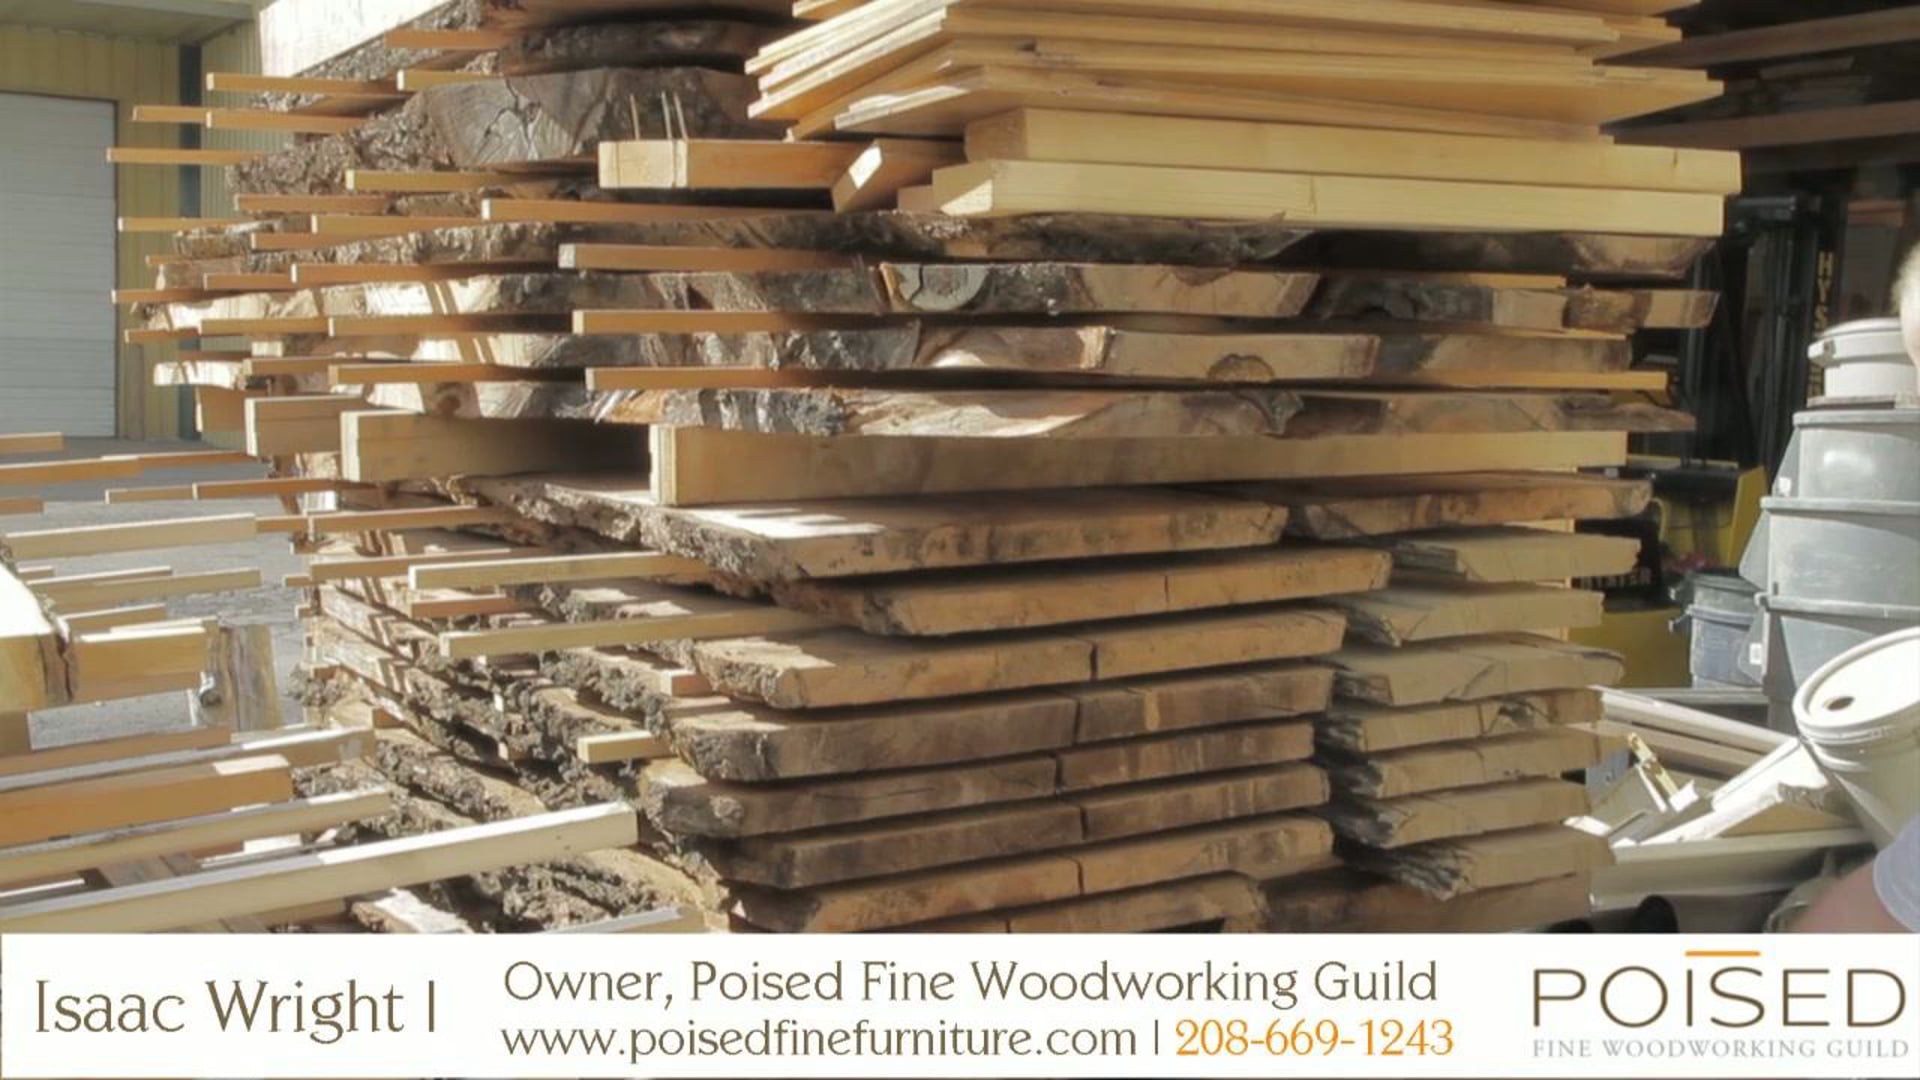 Poised | Fine Woodworking Guild, Moscow, Idaho | Owner Issac Wright on Raw Materials